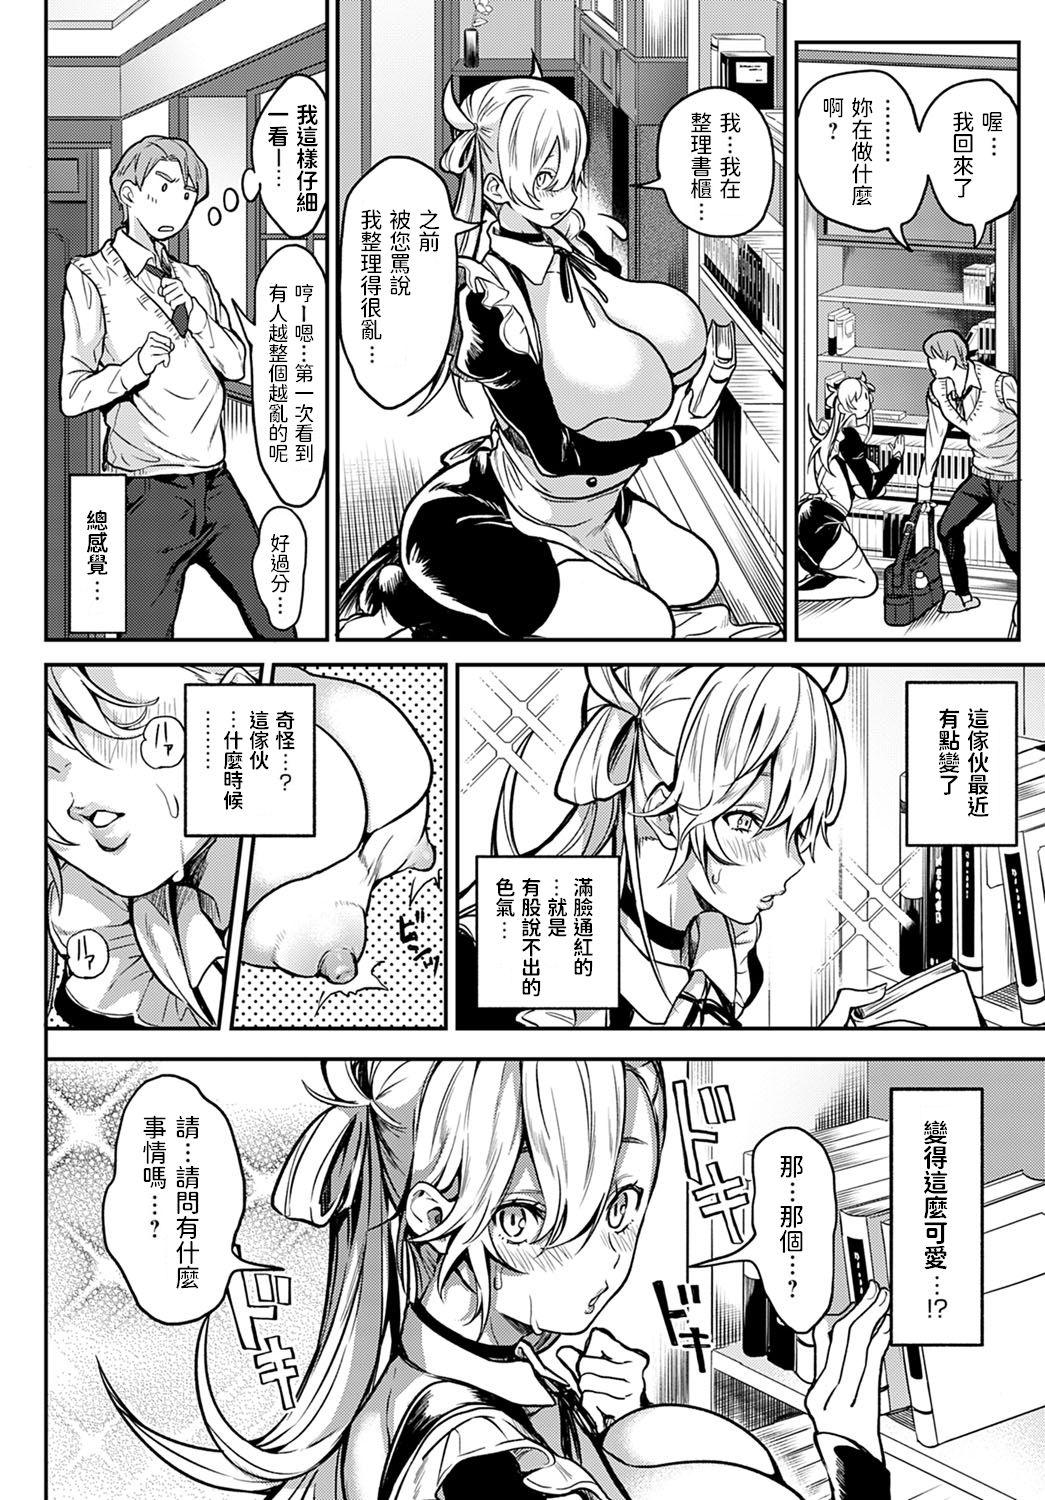 Milky Maiden Page 4 Of 20 hentai haven, Milky Maiden Page 4 Of 20 uncensore...